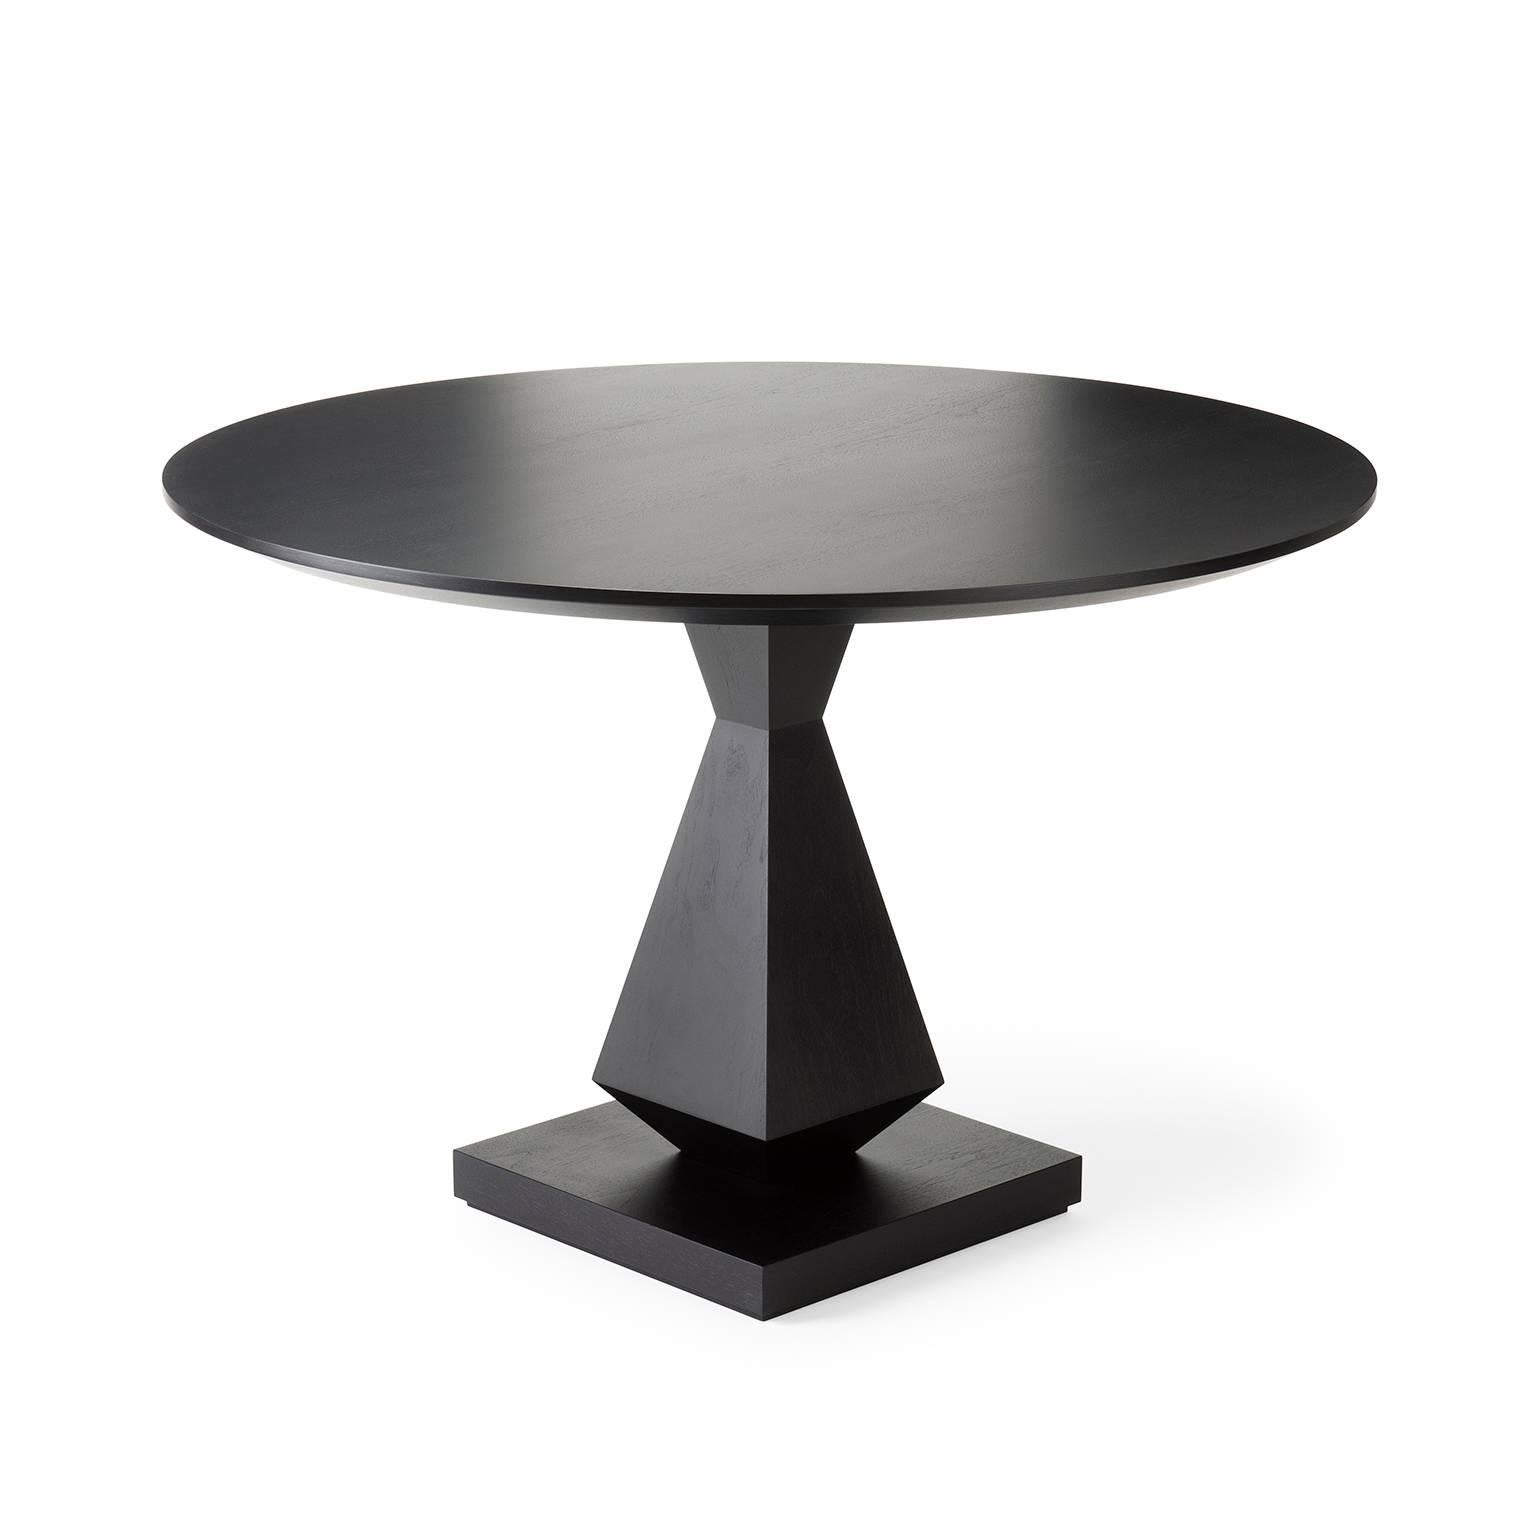 With its angular, symmetrical base and bevelled top this design is available as a console, occasional or dining table, with the option of specifying a lacquer color to the top. Shown here in black lacquered walnut.

Fourth image shows the lacquer